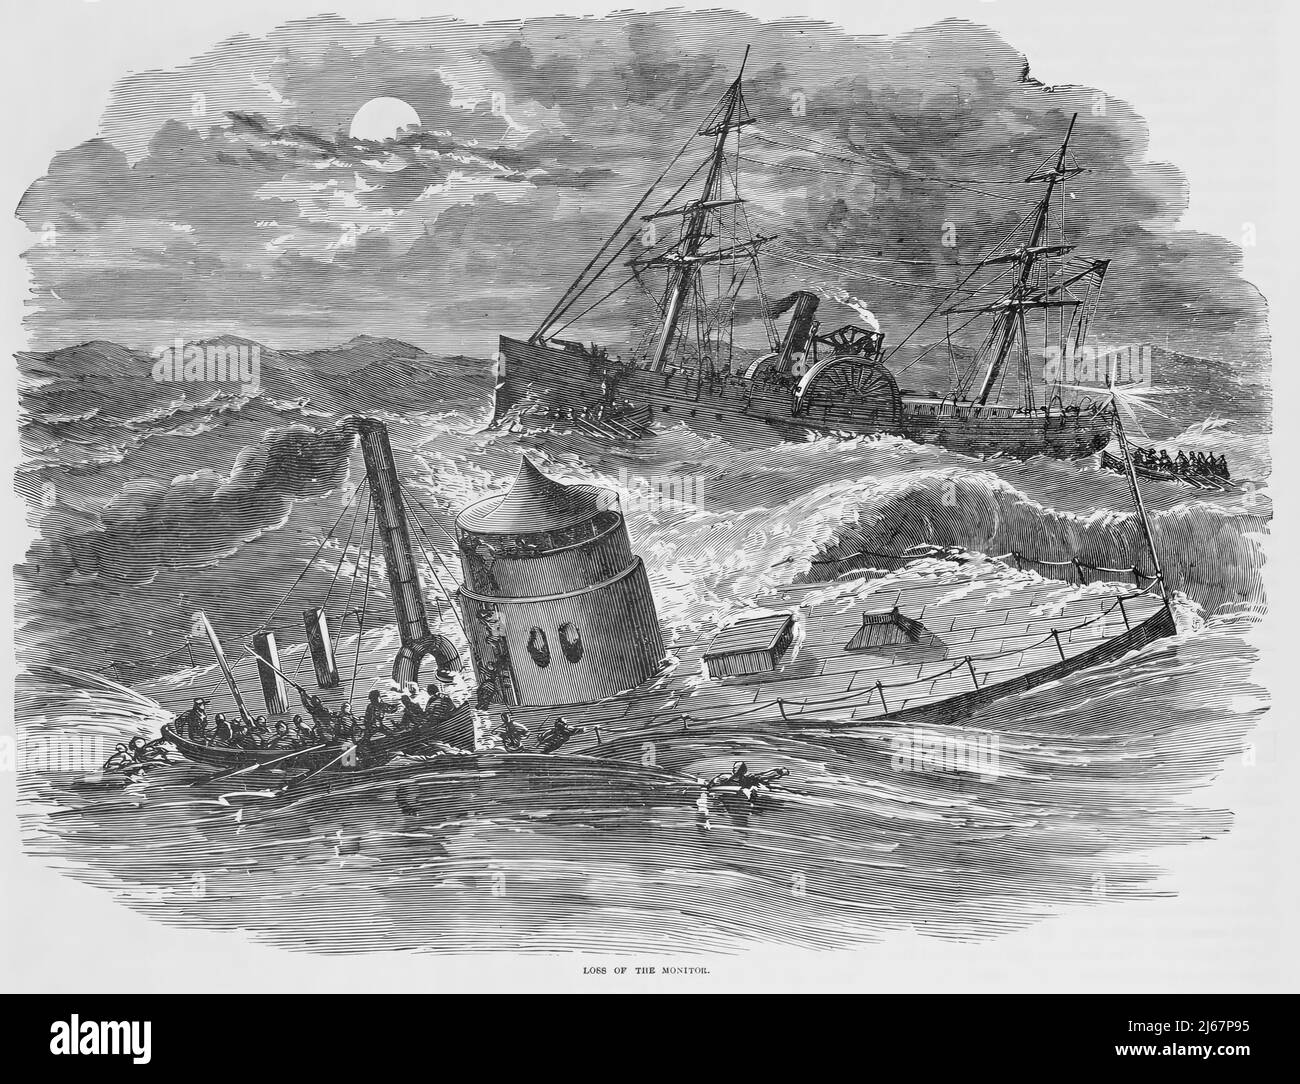 Loss of the USS Monitor, December 1862, in the American Civil War. 19th century illustration Stock Photo